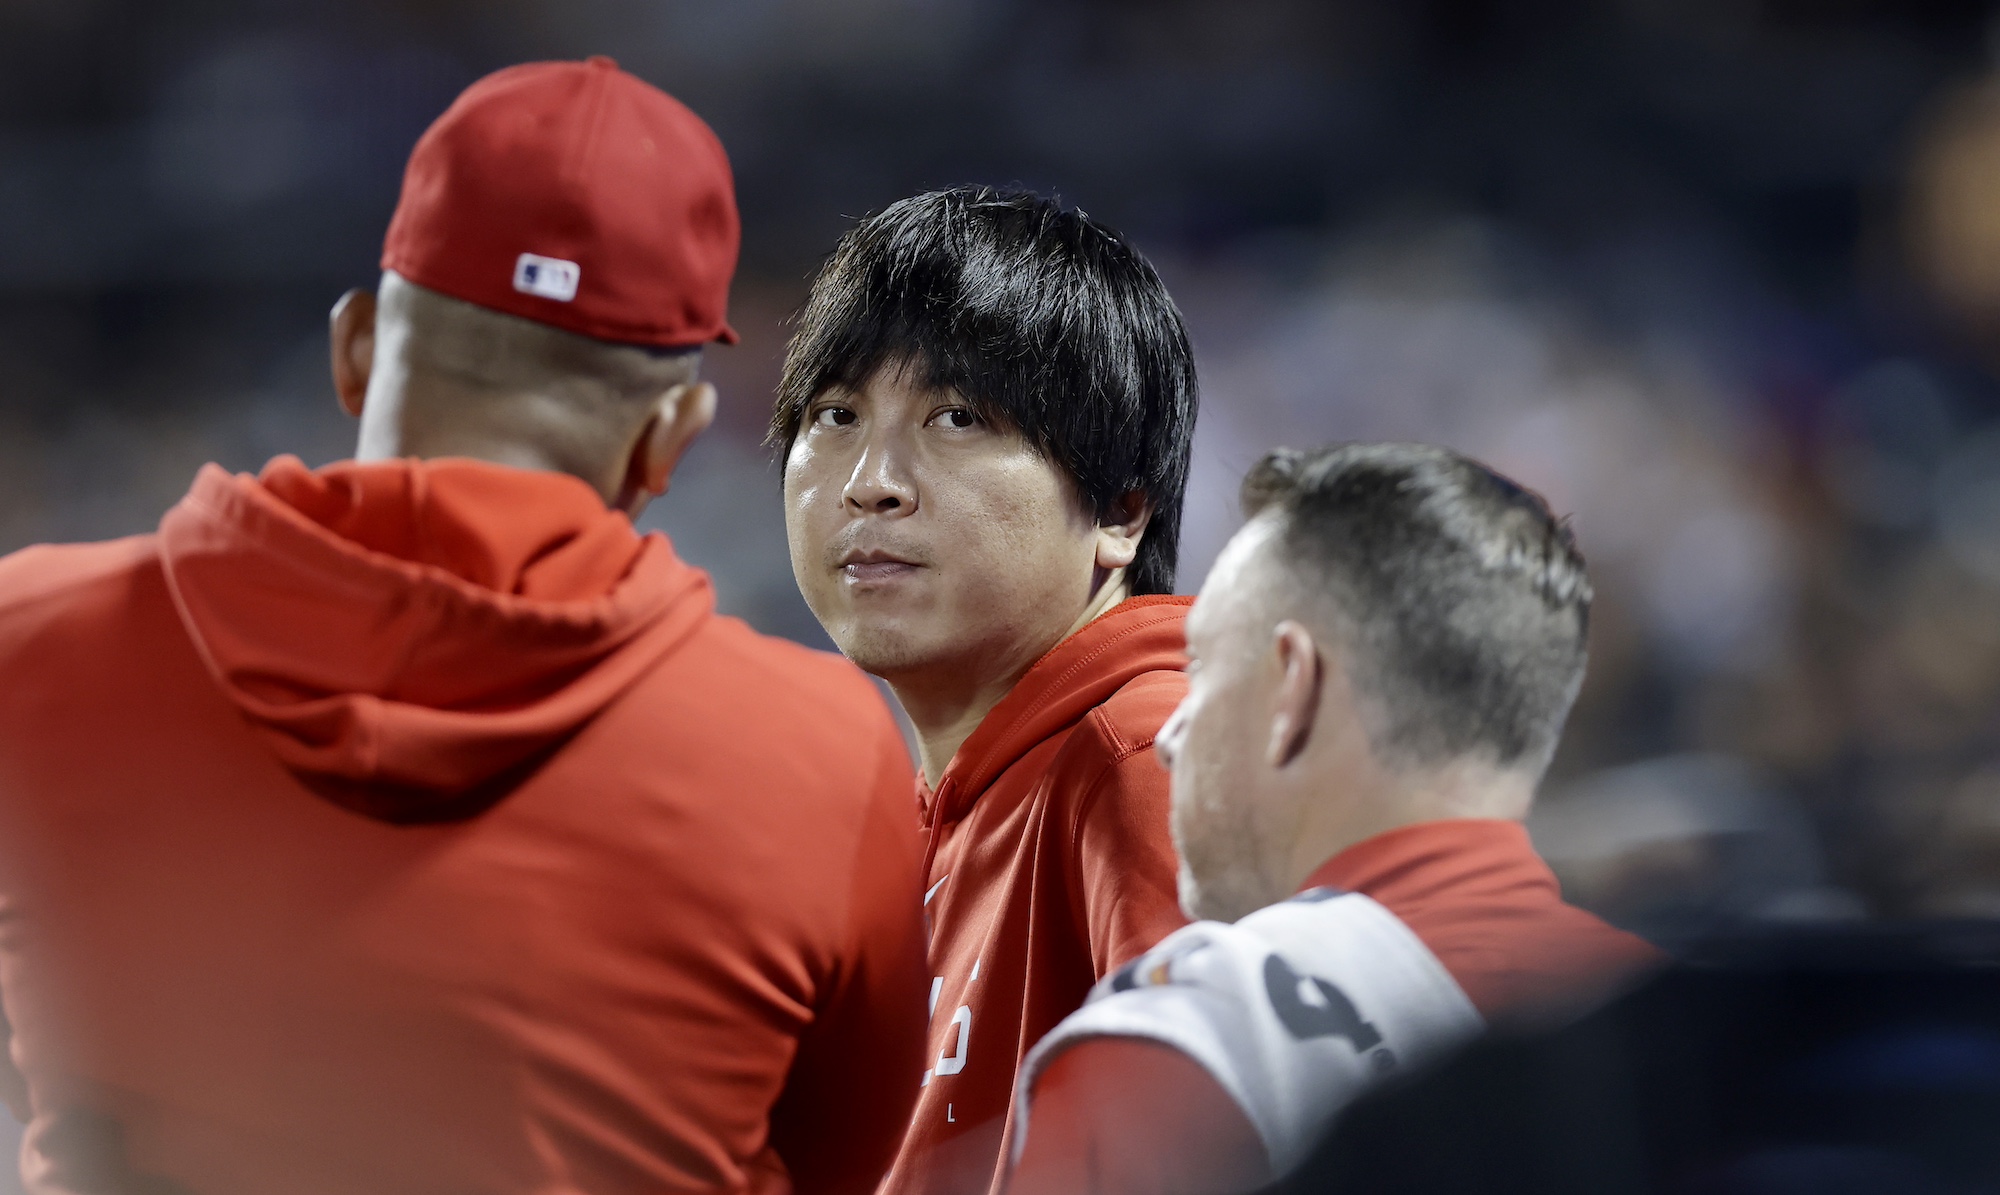 NEW YORK, NEW YORK - AUGUST 25: Interpreter Ippei Mizuhara of the Los Angeles Angels looks on against the New York Mets at Citi Field on August 25, 2023 in New York City. The Angels defeated the Mets 3-1. (Photo by Jim McIsaac/Getty Images)